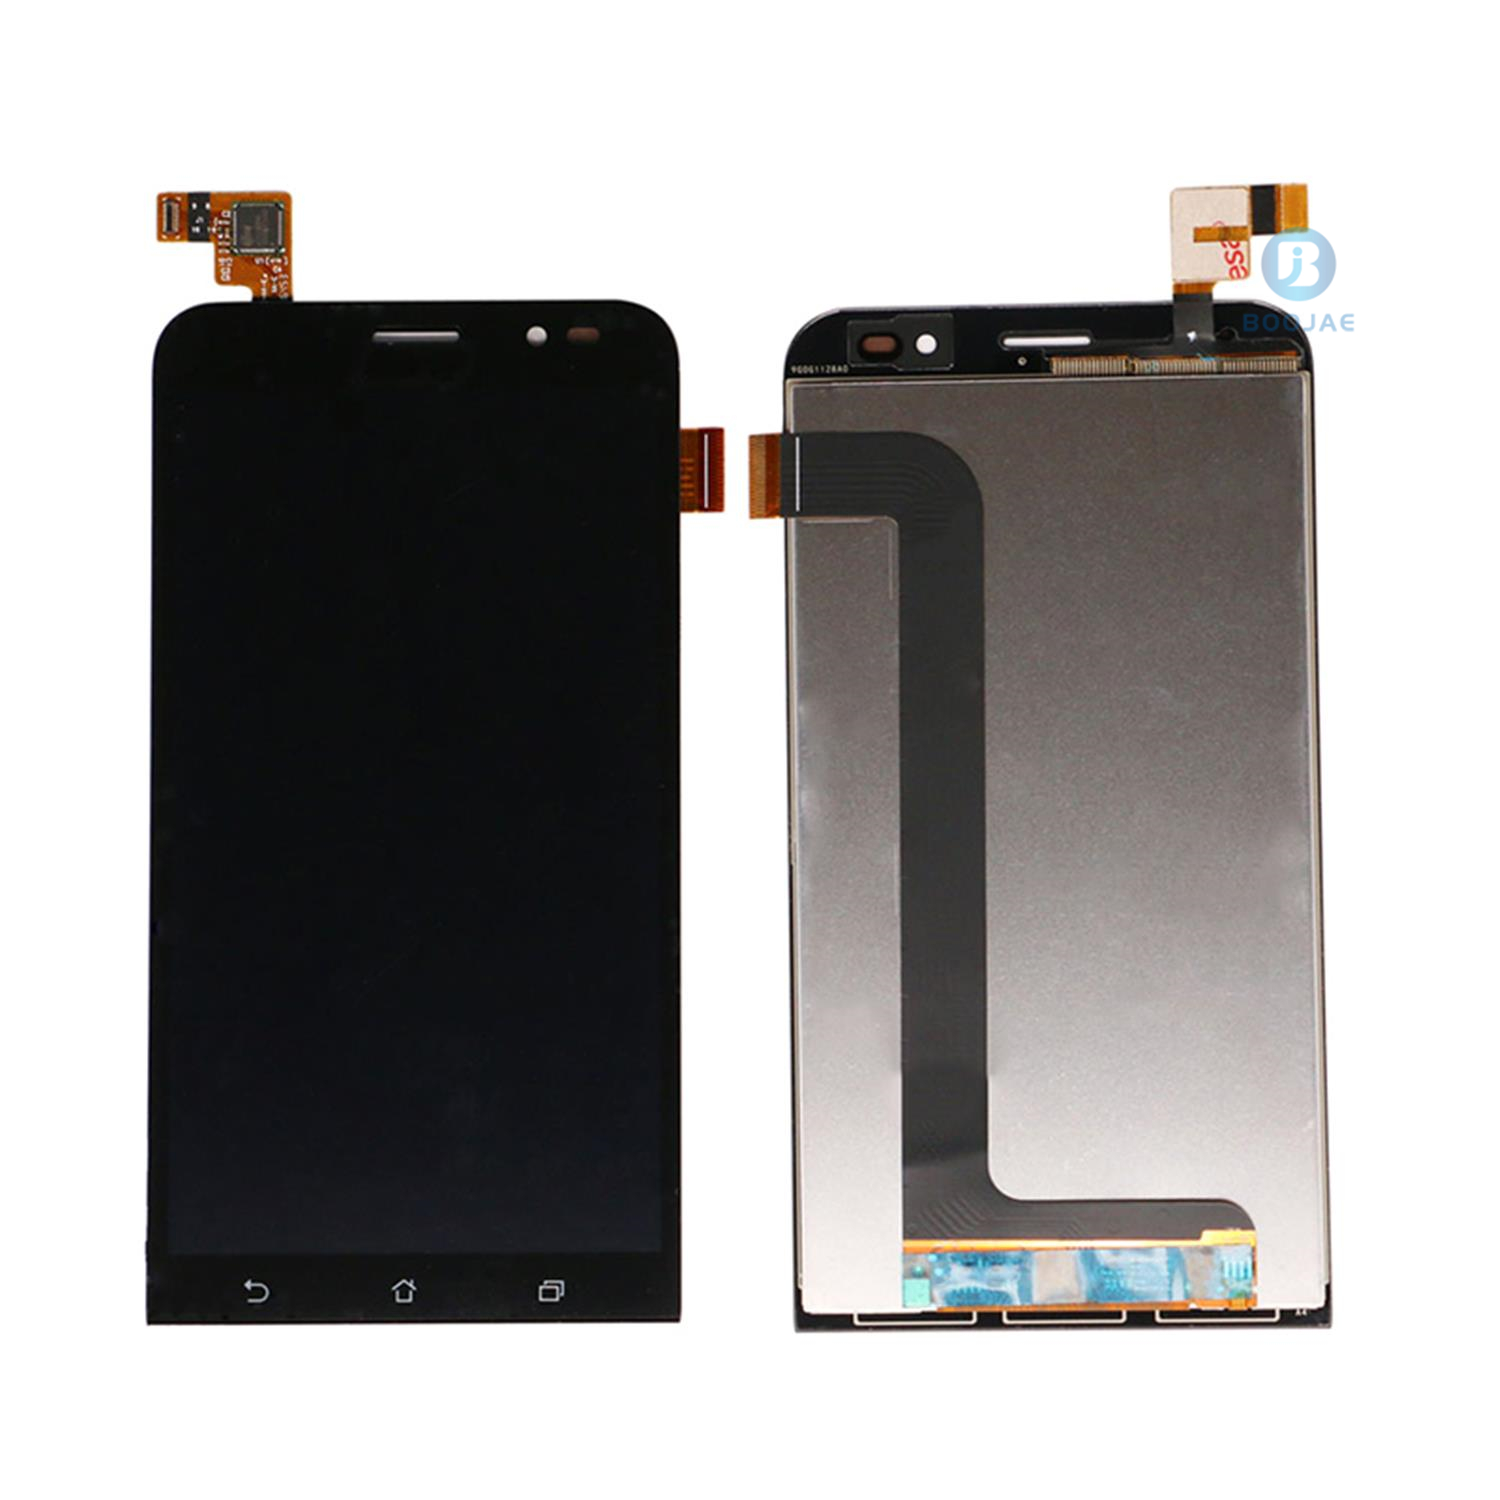 Asus Zenfone ZB552KL LCD Screen Display, Lcd Assembly Replacement